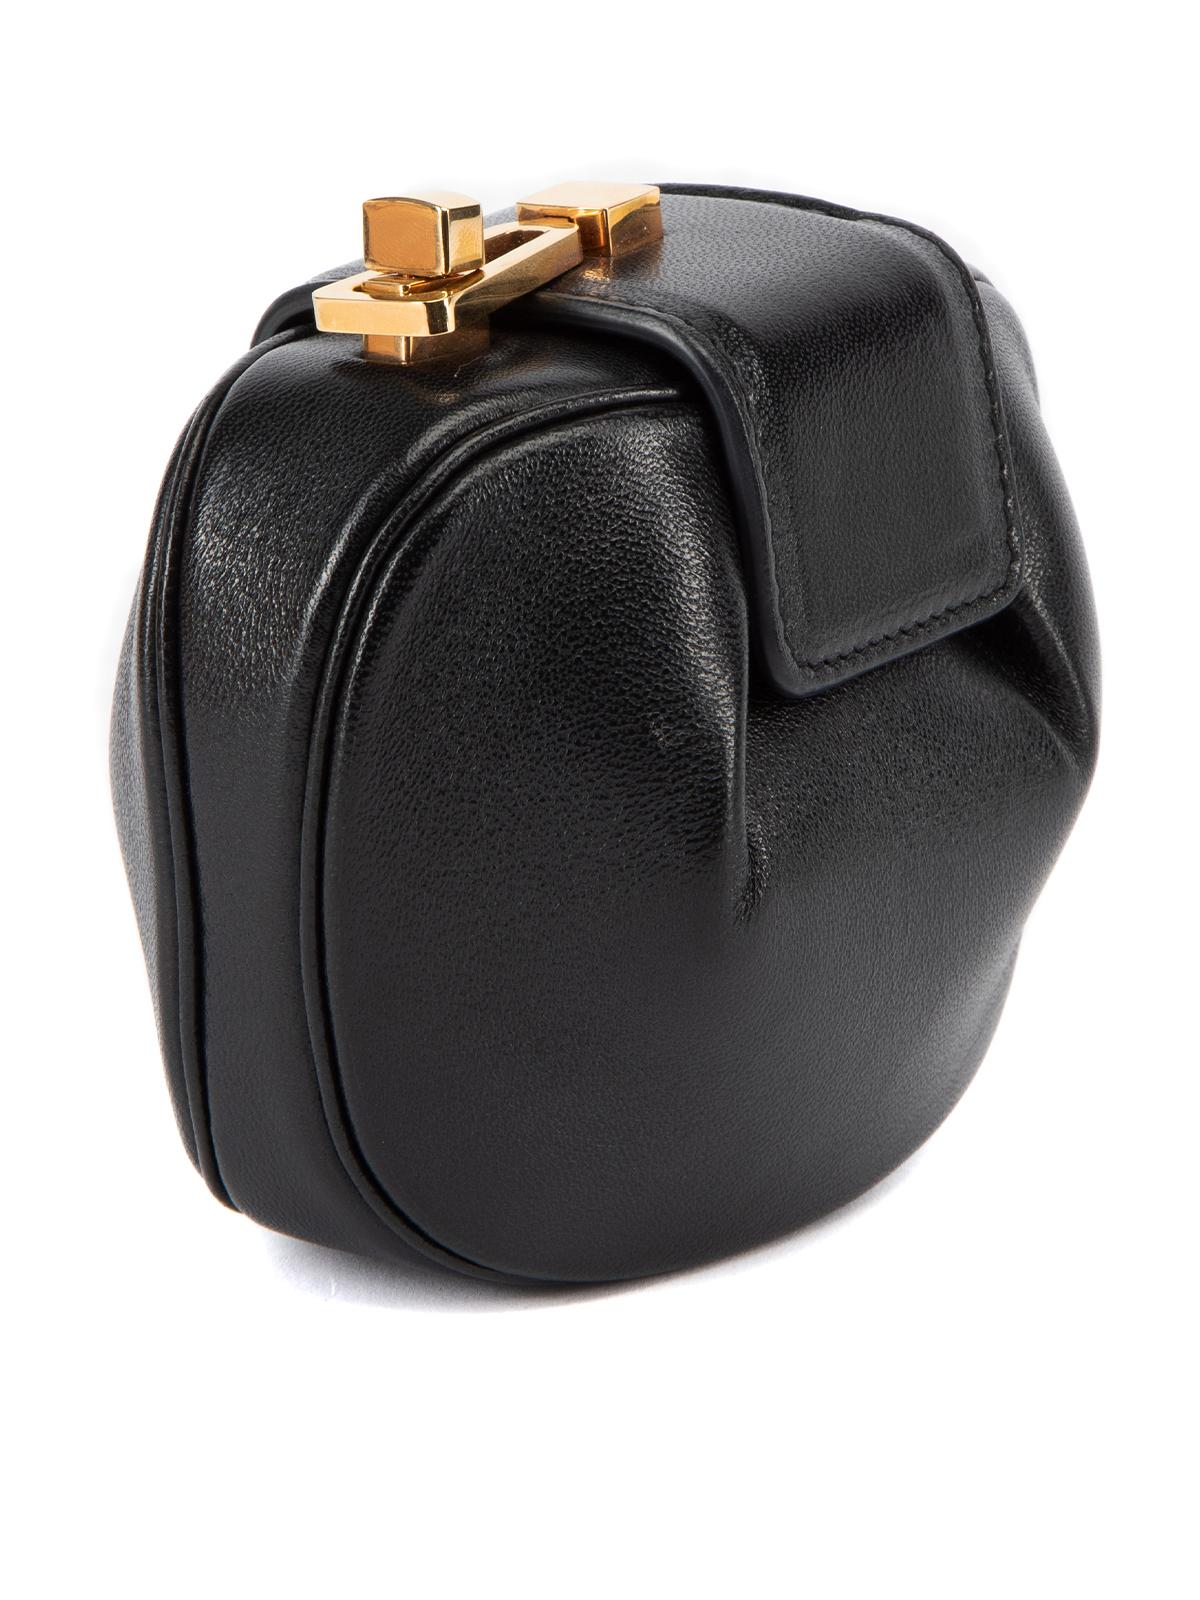 CONDITION is Very good. Hardly any visible wear to coin purse is evident on this used Gabriella Hearst designer resale item. This item comes with the original dustbag. Details Black Leather Coin purse Rounded shape Turn lock closure Gold tone